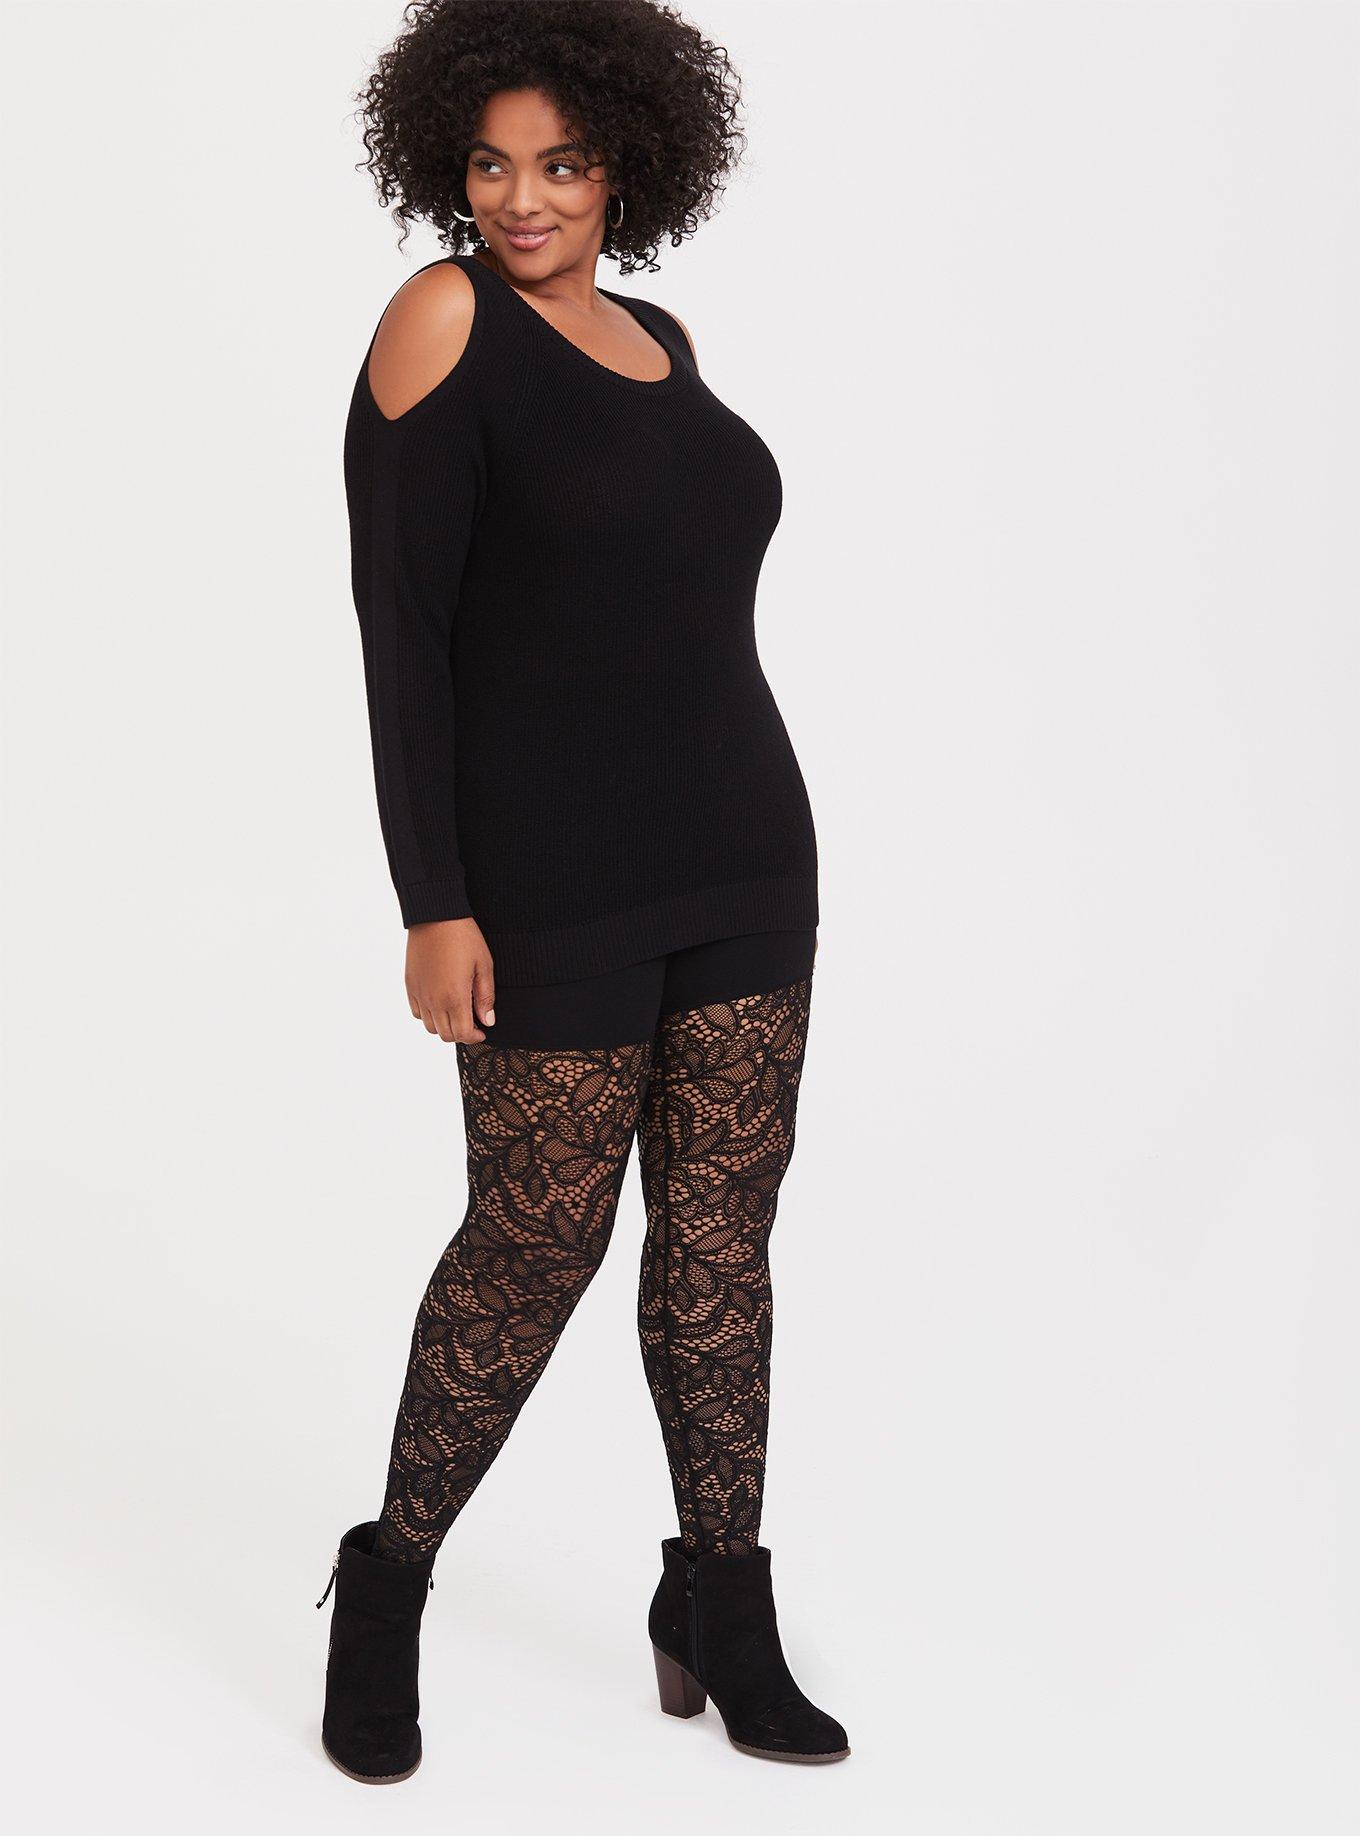 Lace See Through Leggings For Salem